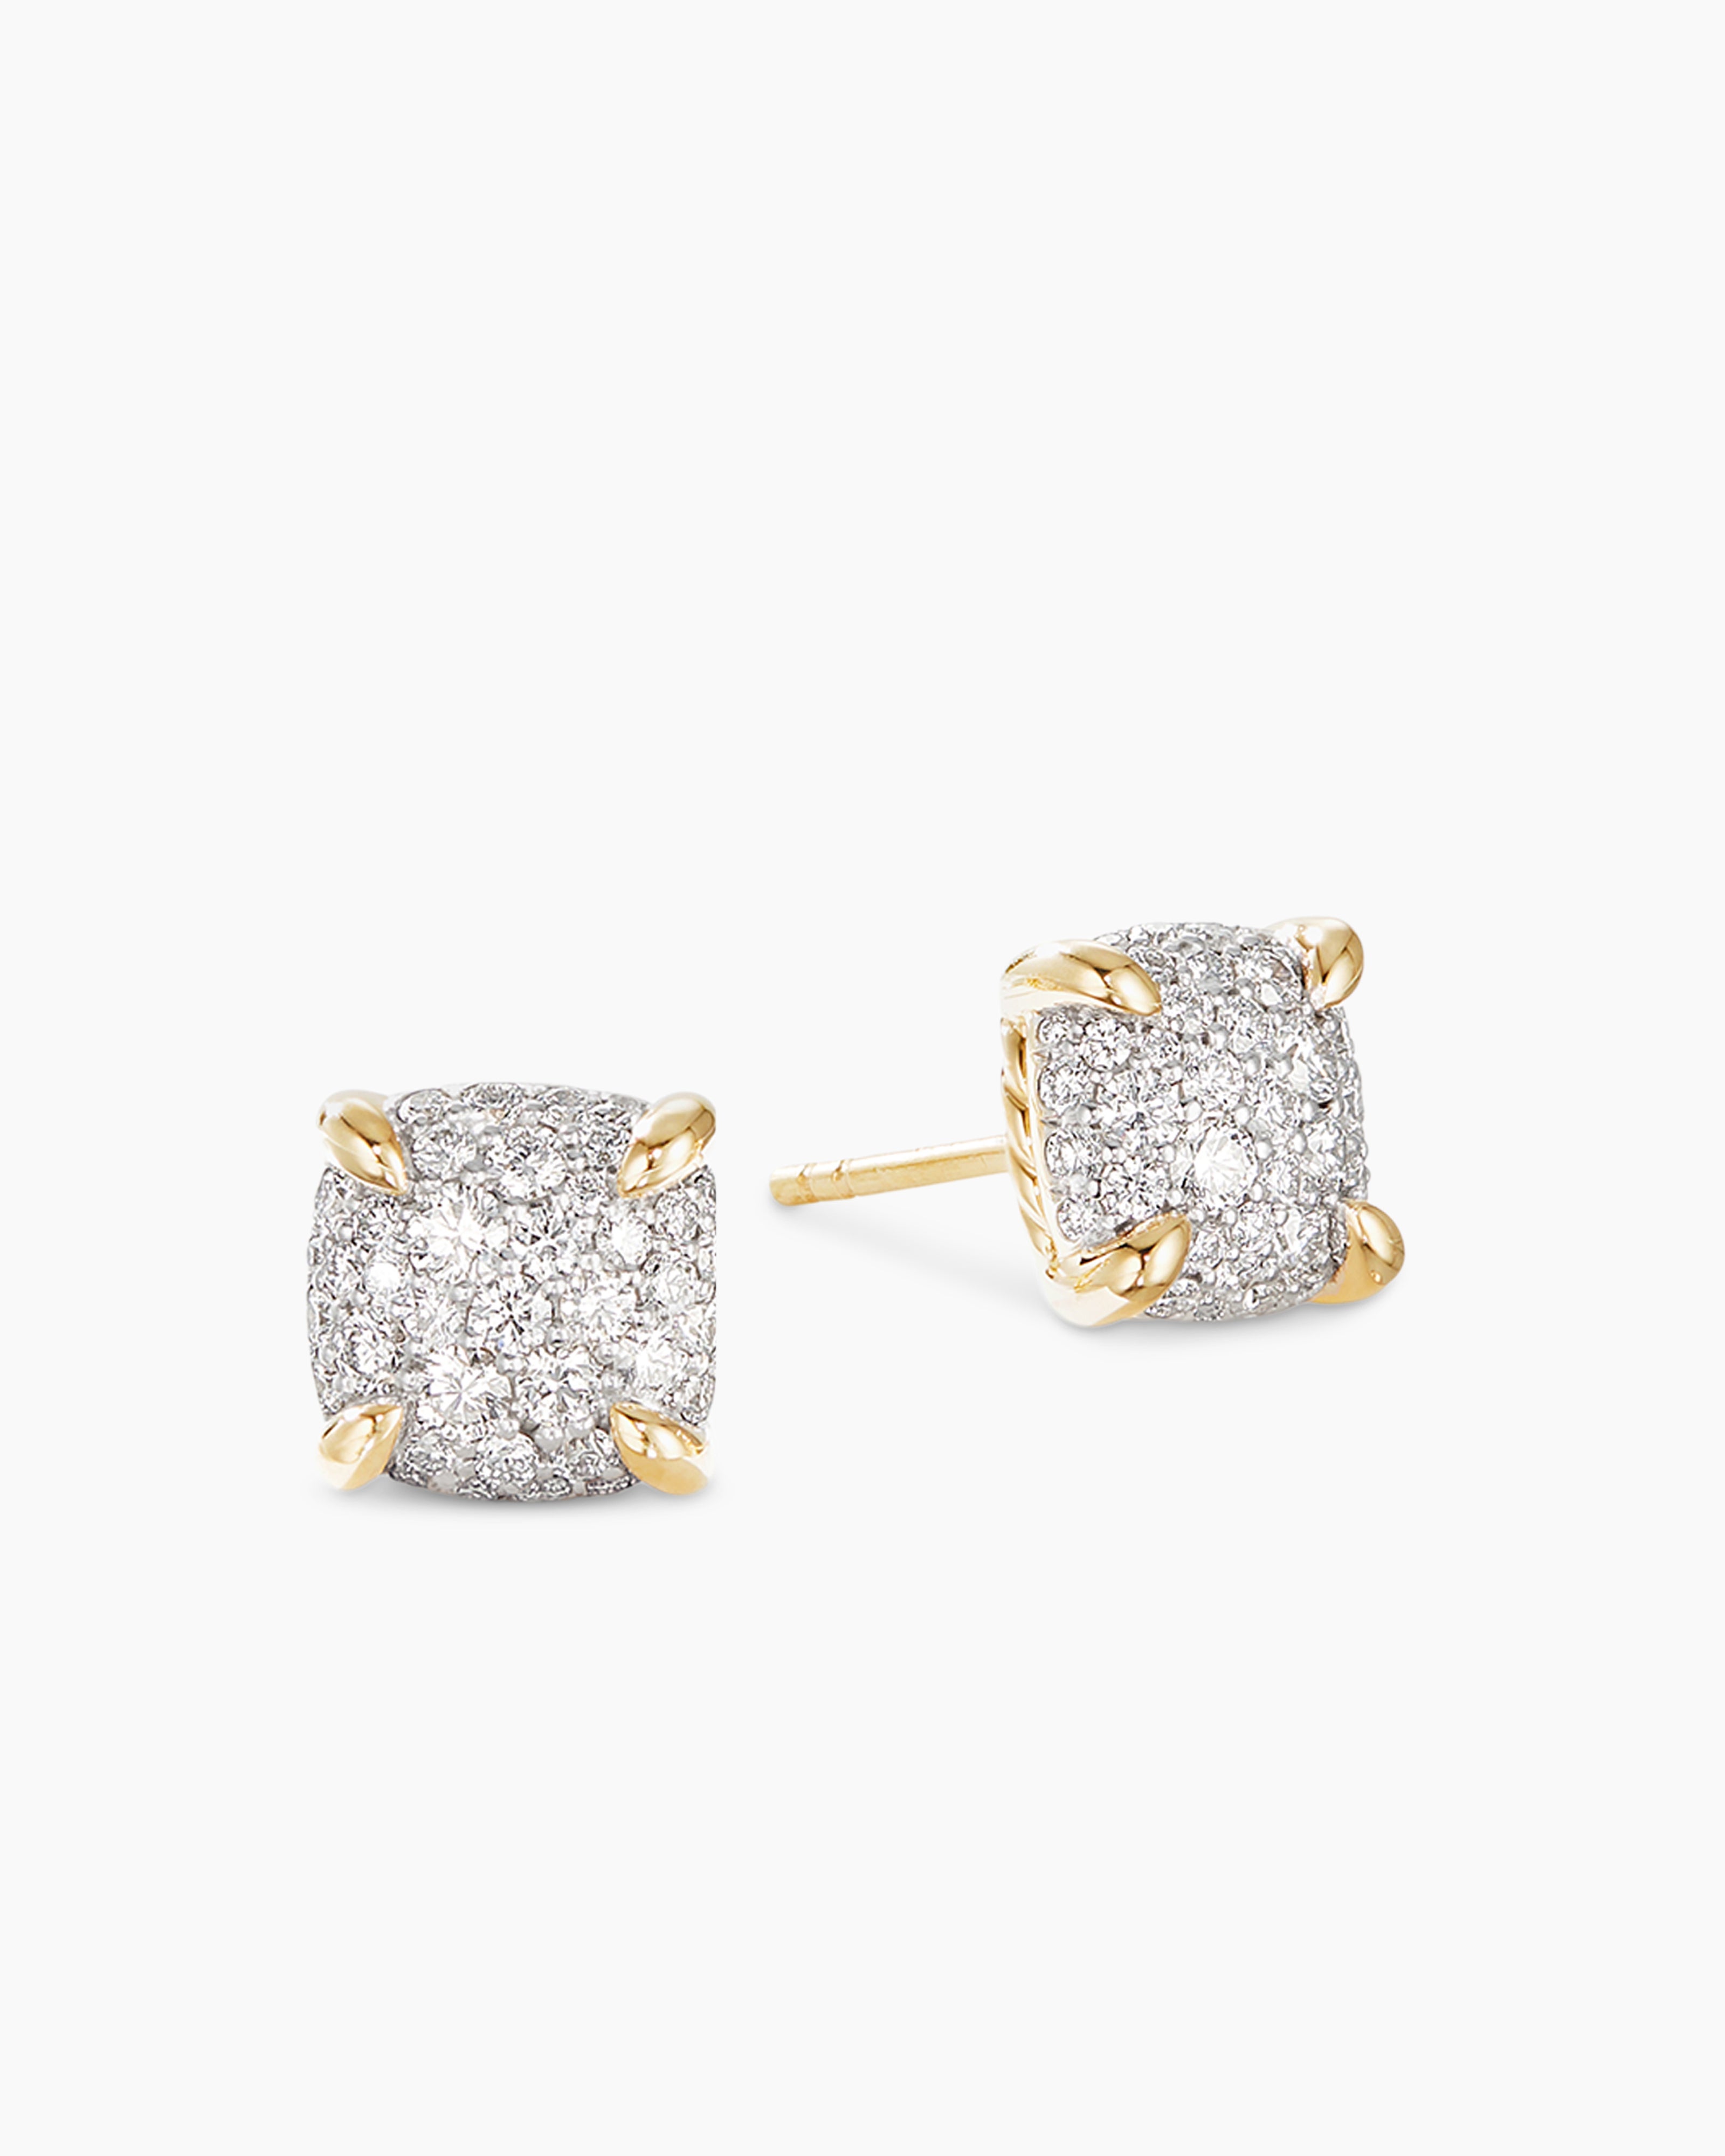 .76 Diamond Cluster Pave Earring Studs in 18k White Gold